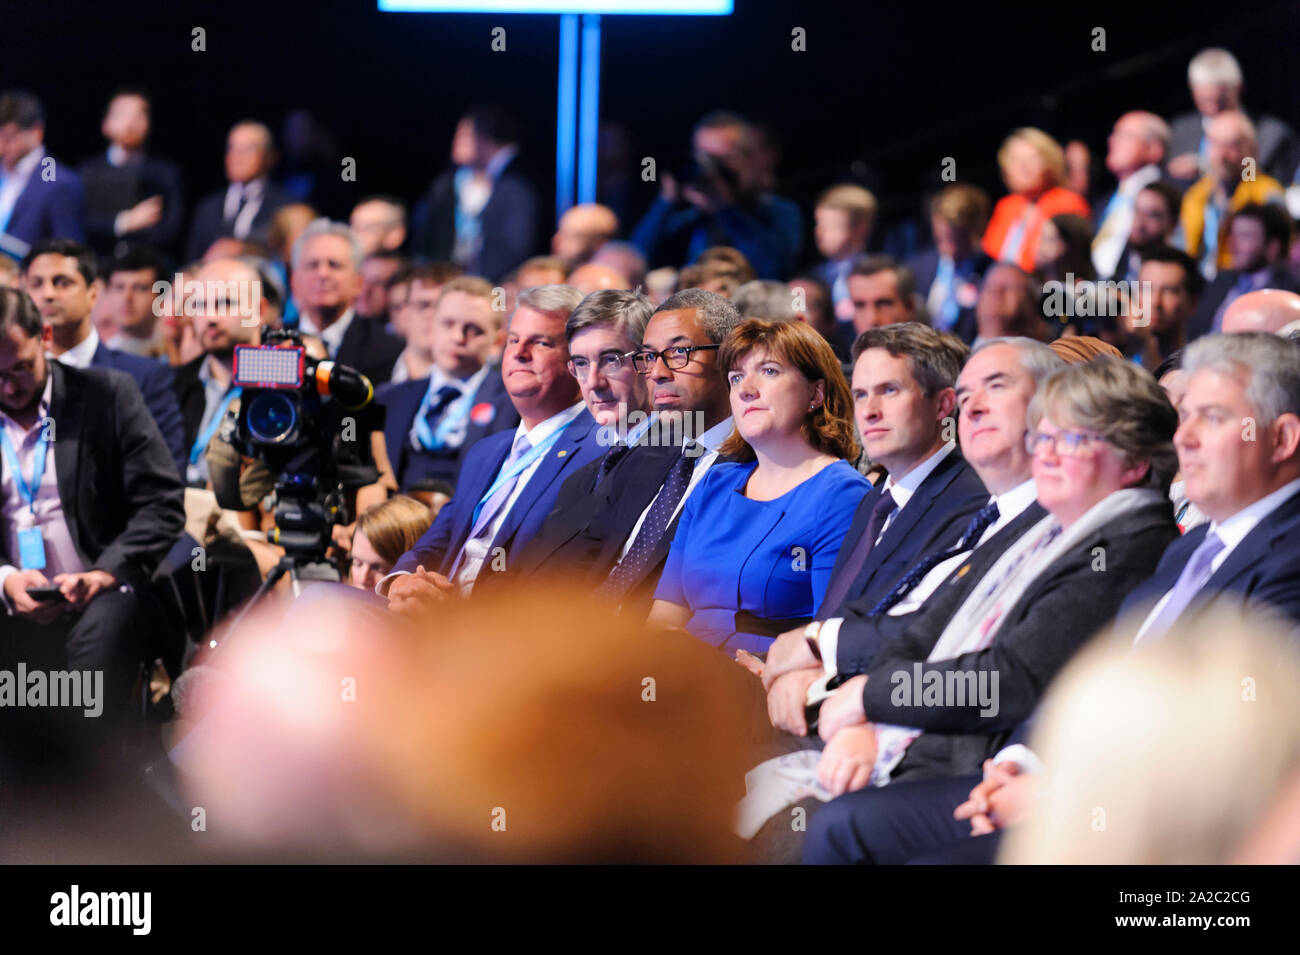 Manchester, UK. 2nd October 2019. Members of the cabinet watch The Prime Minister, The Rt Hon Boris Johnson MP, delivers his keynote speech on day 4 of the 2019 Conservative Party Conference at Manchester Central. Credit: Paul Warburton/Alamy Live News Stock Photo